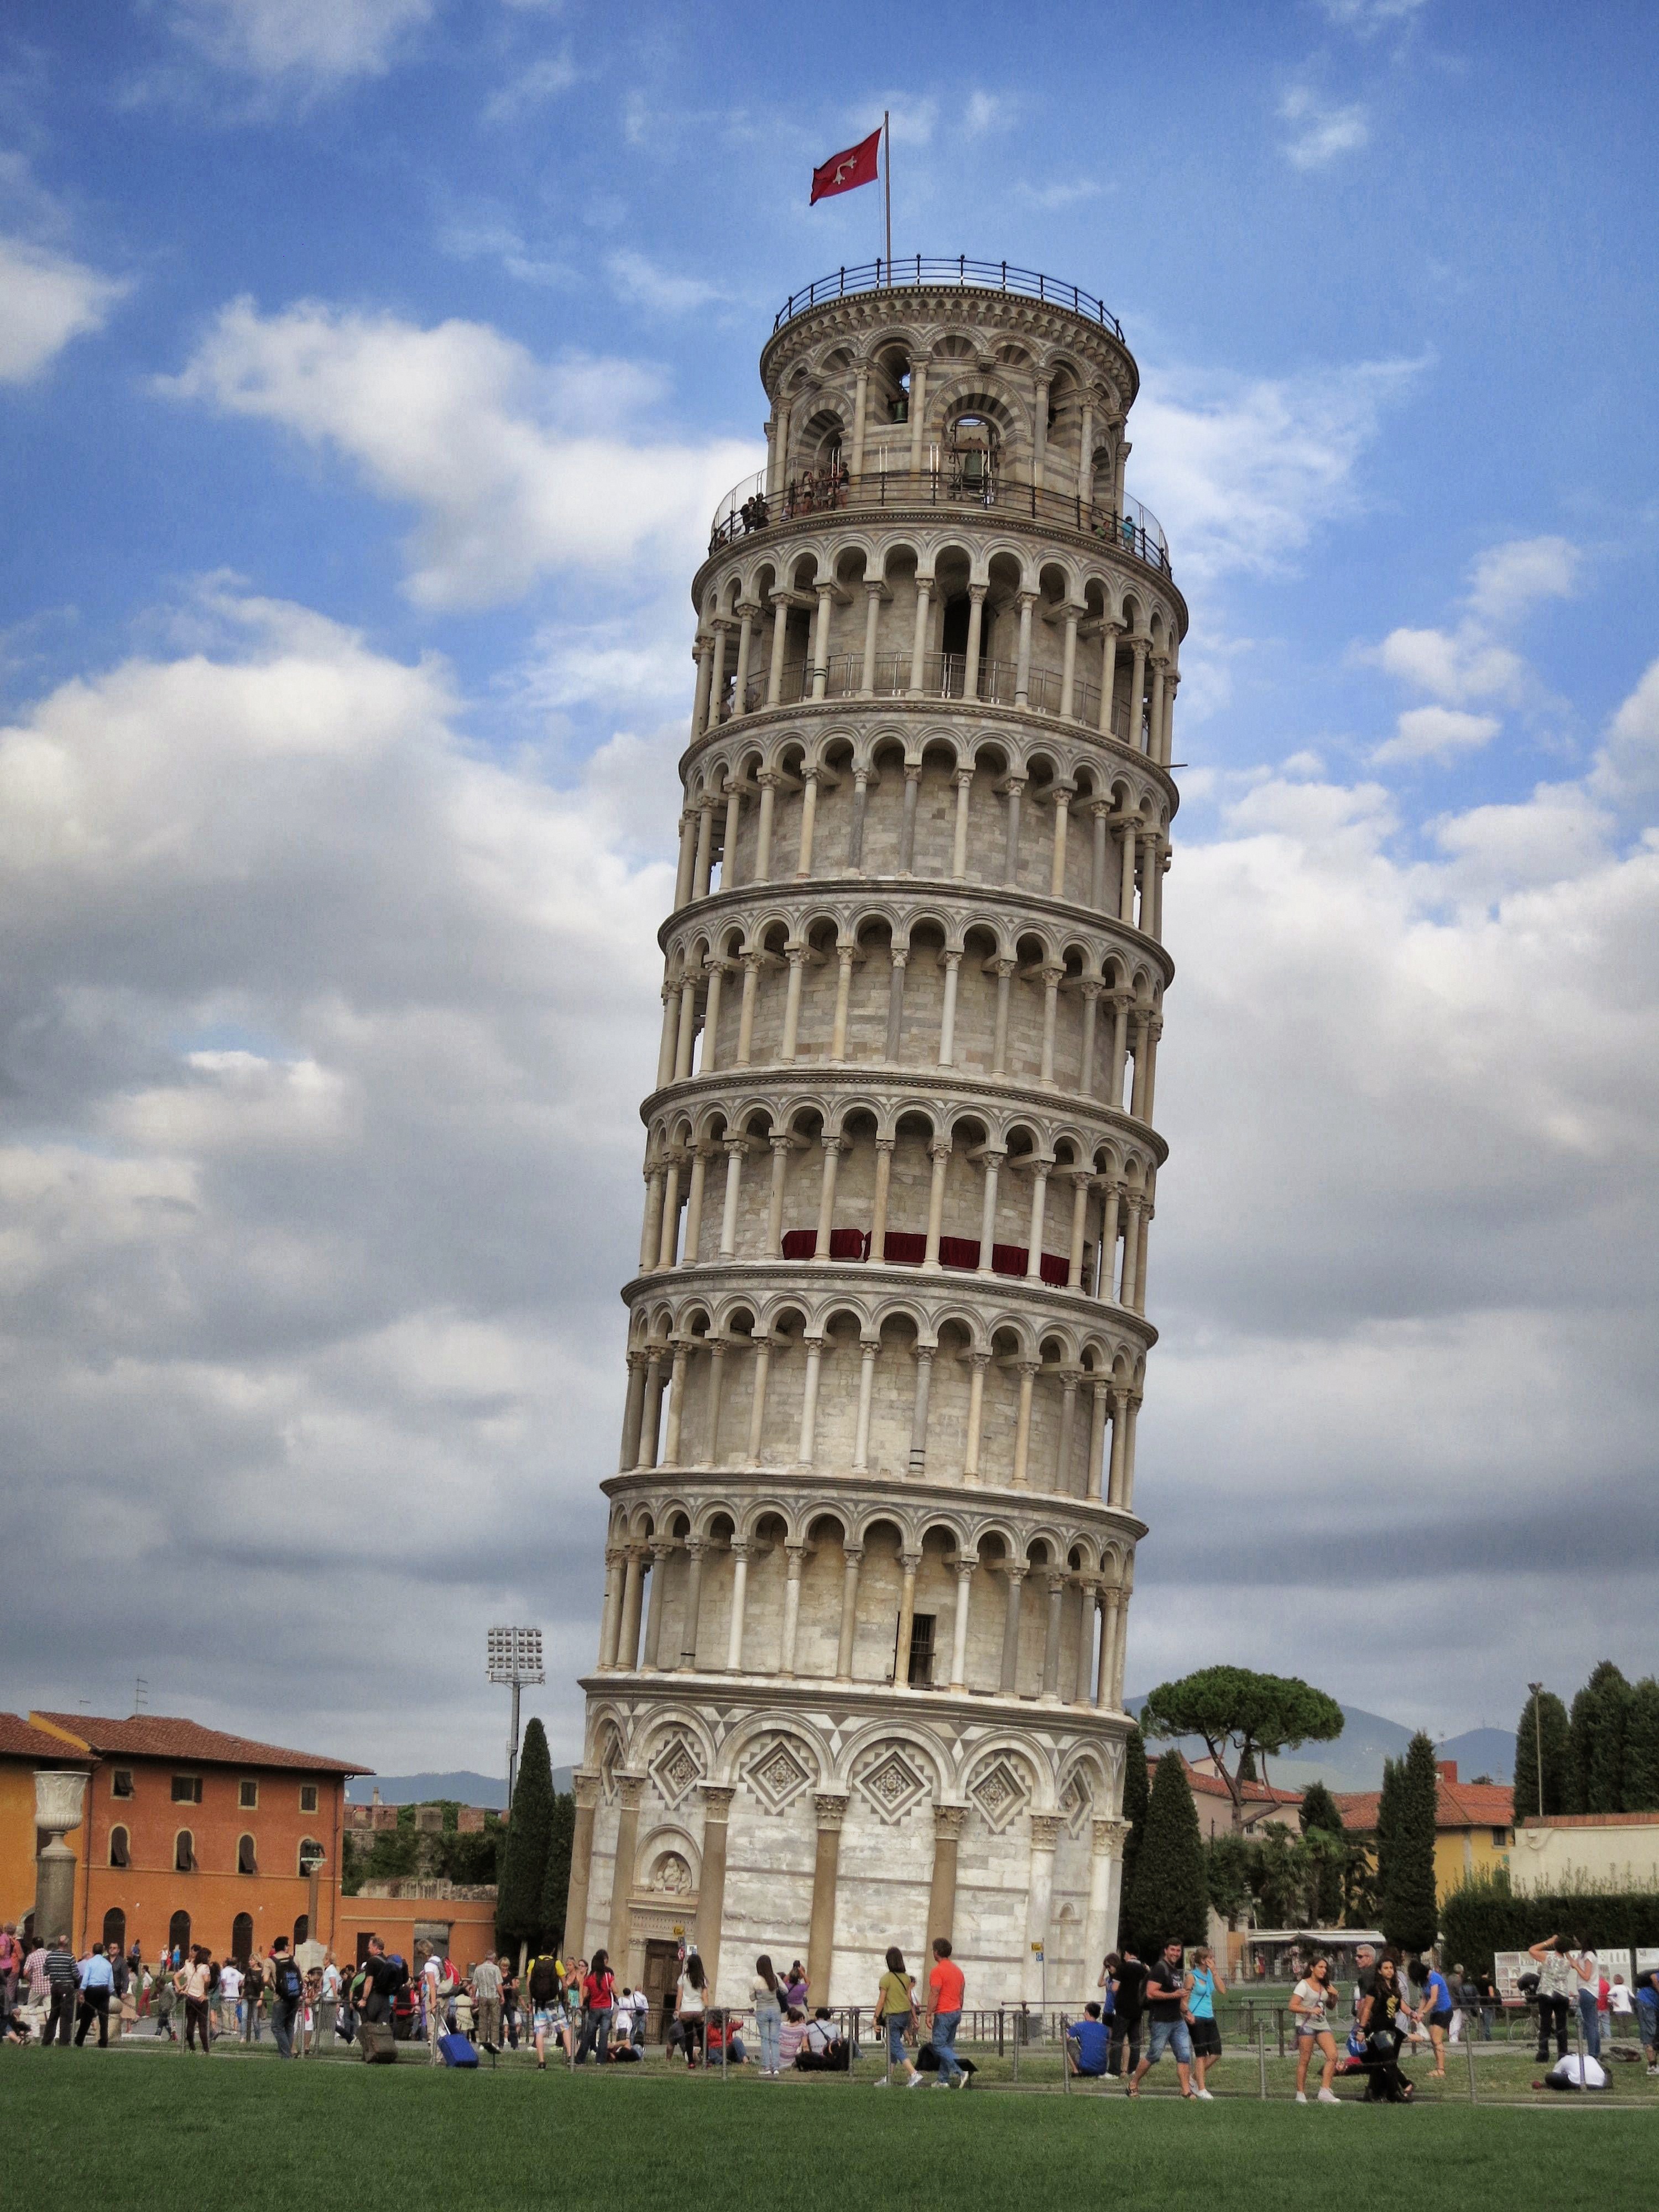 Things to do in Pisa – Climb the Leaning Tower